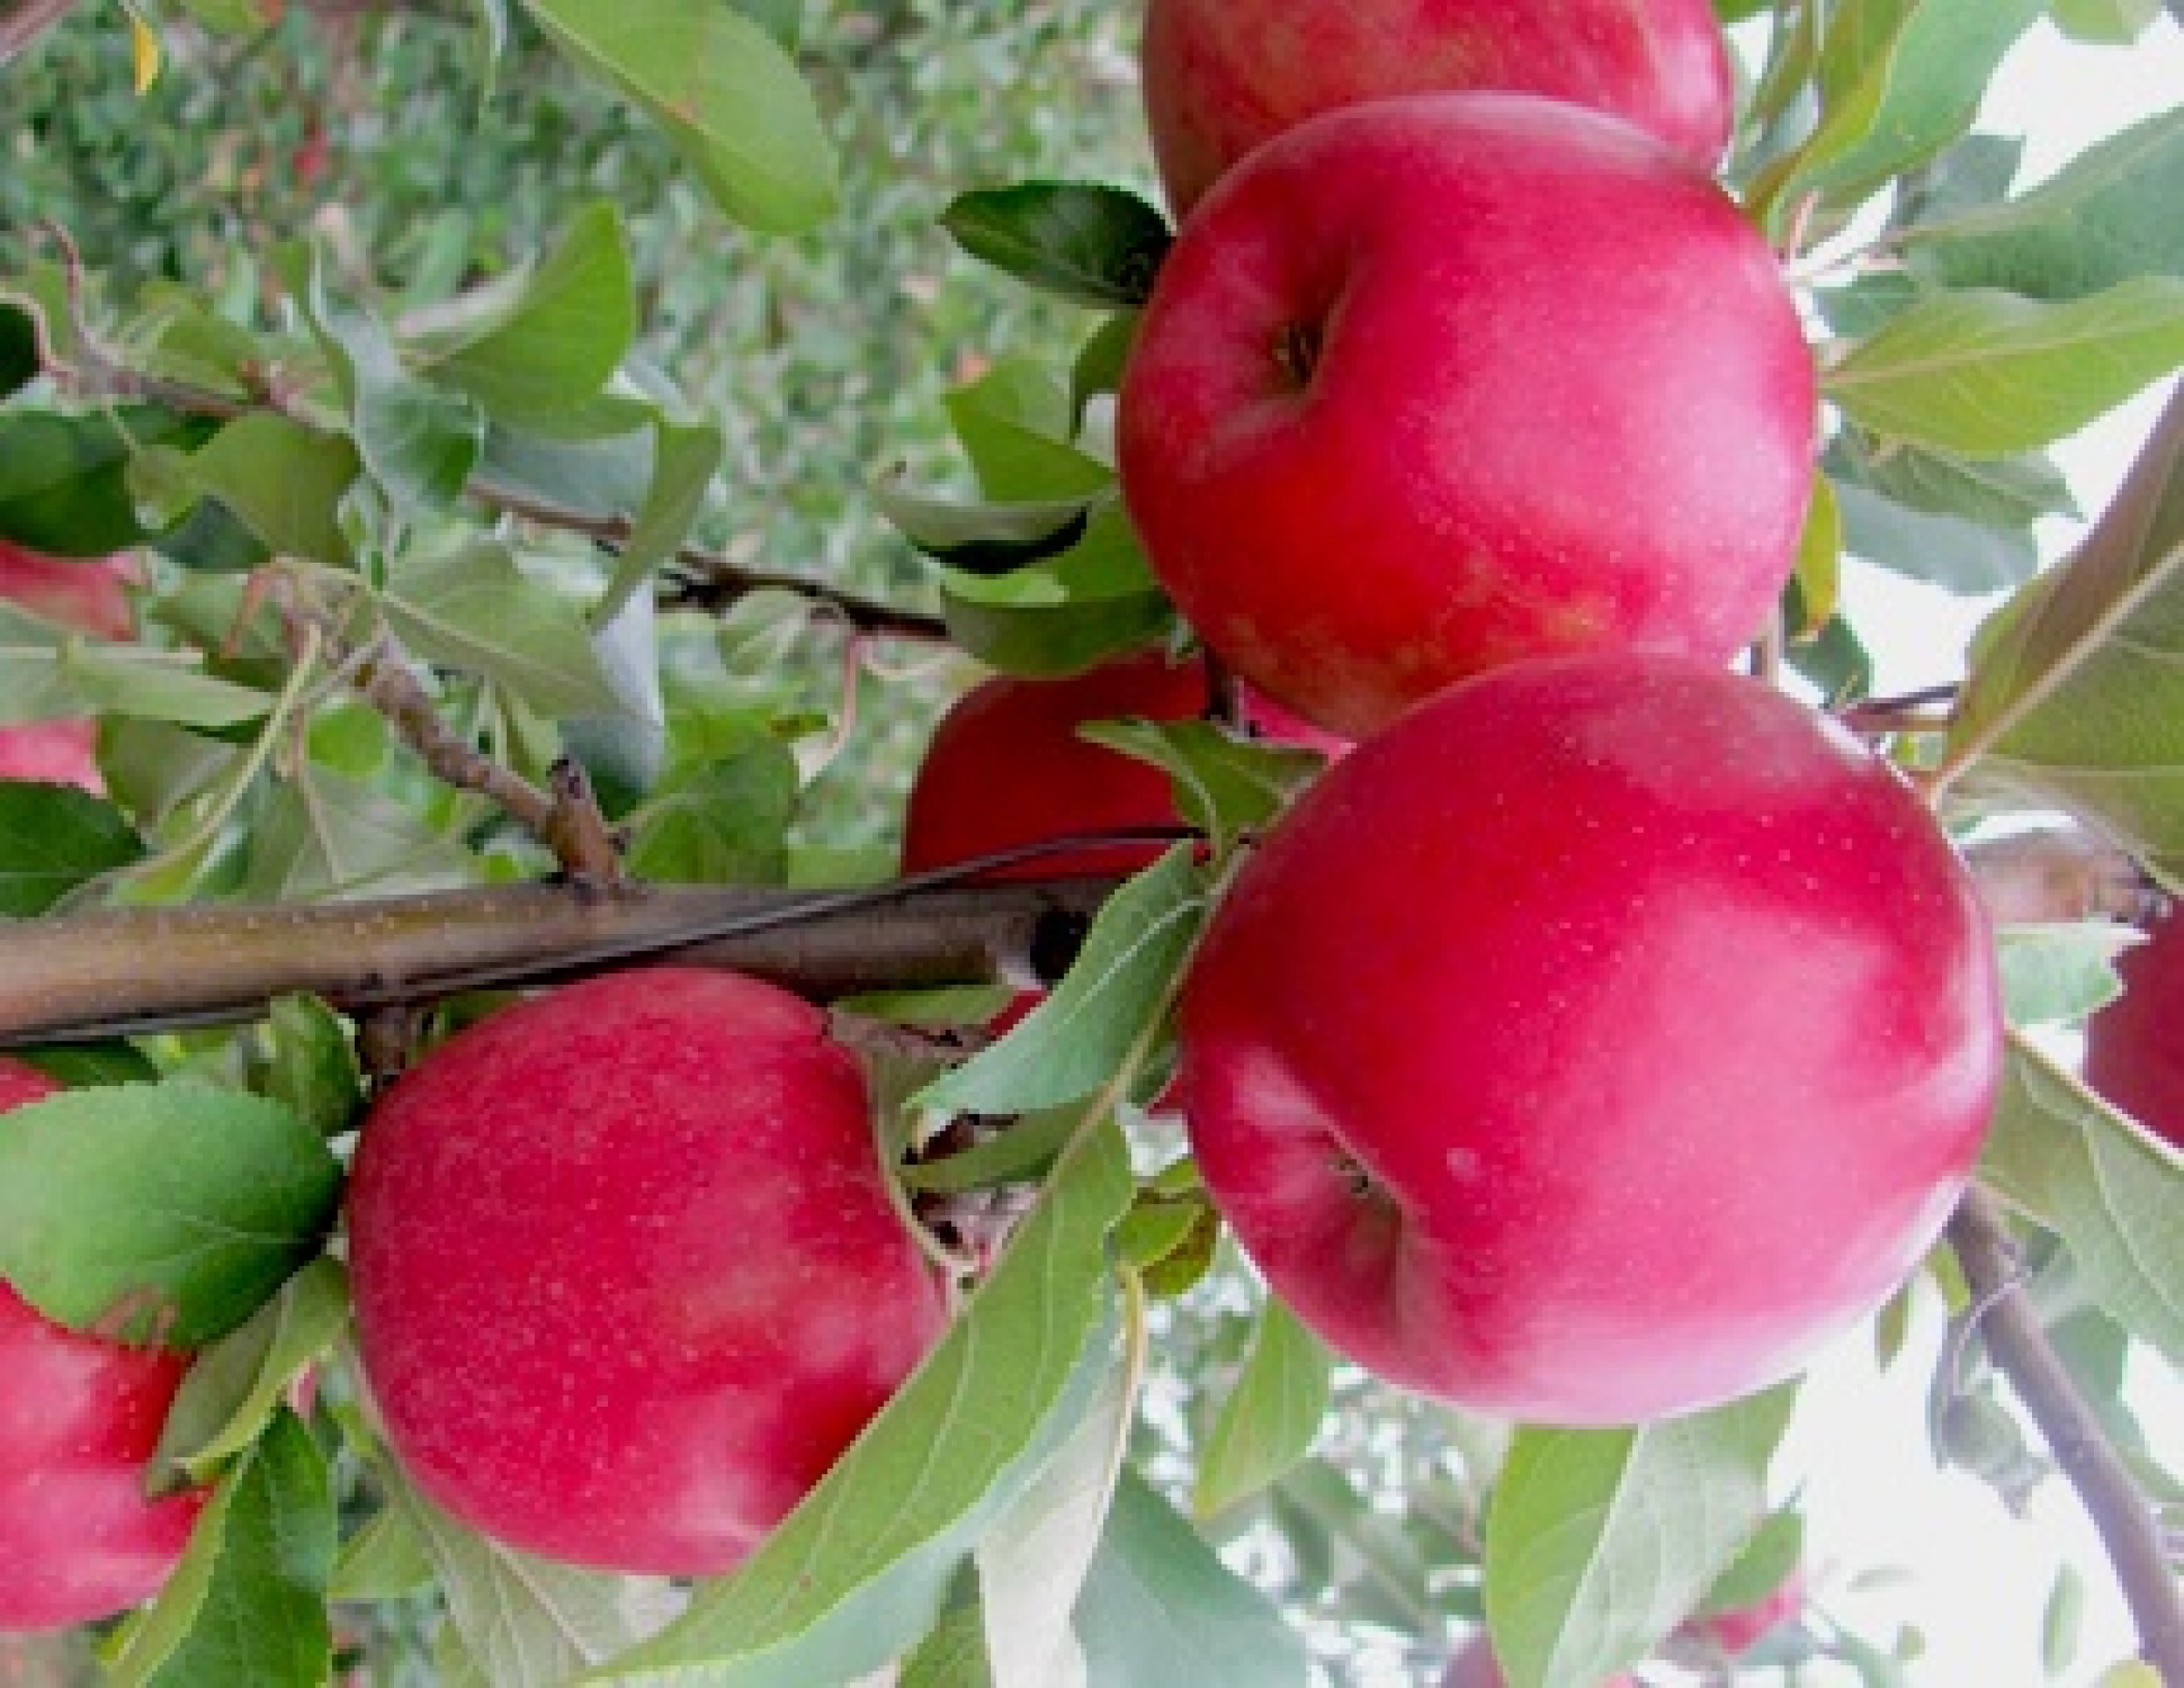 New Apple Varieties We're Excited About SnapDragon, RubyFrost